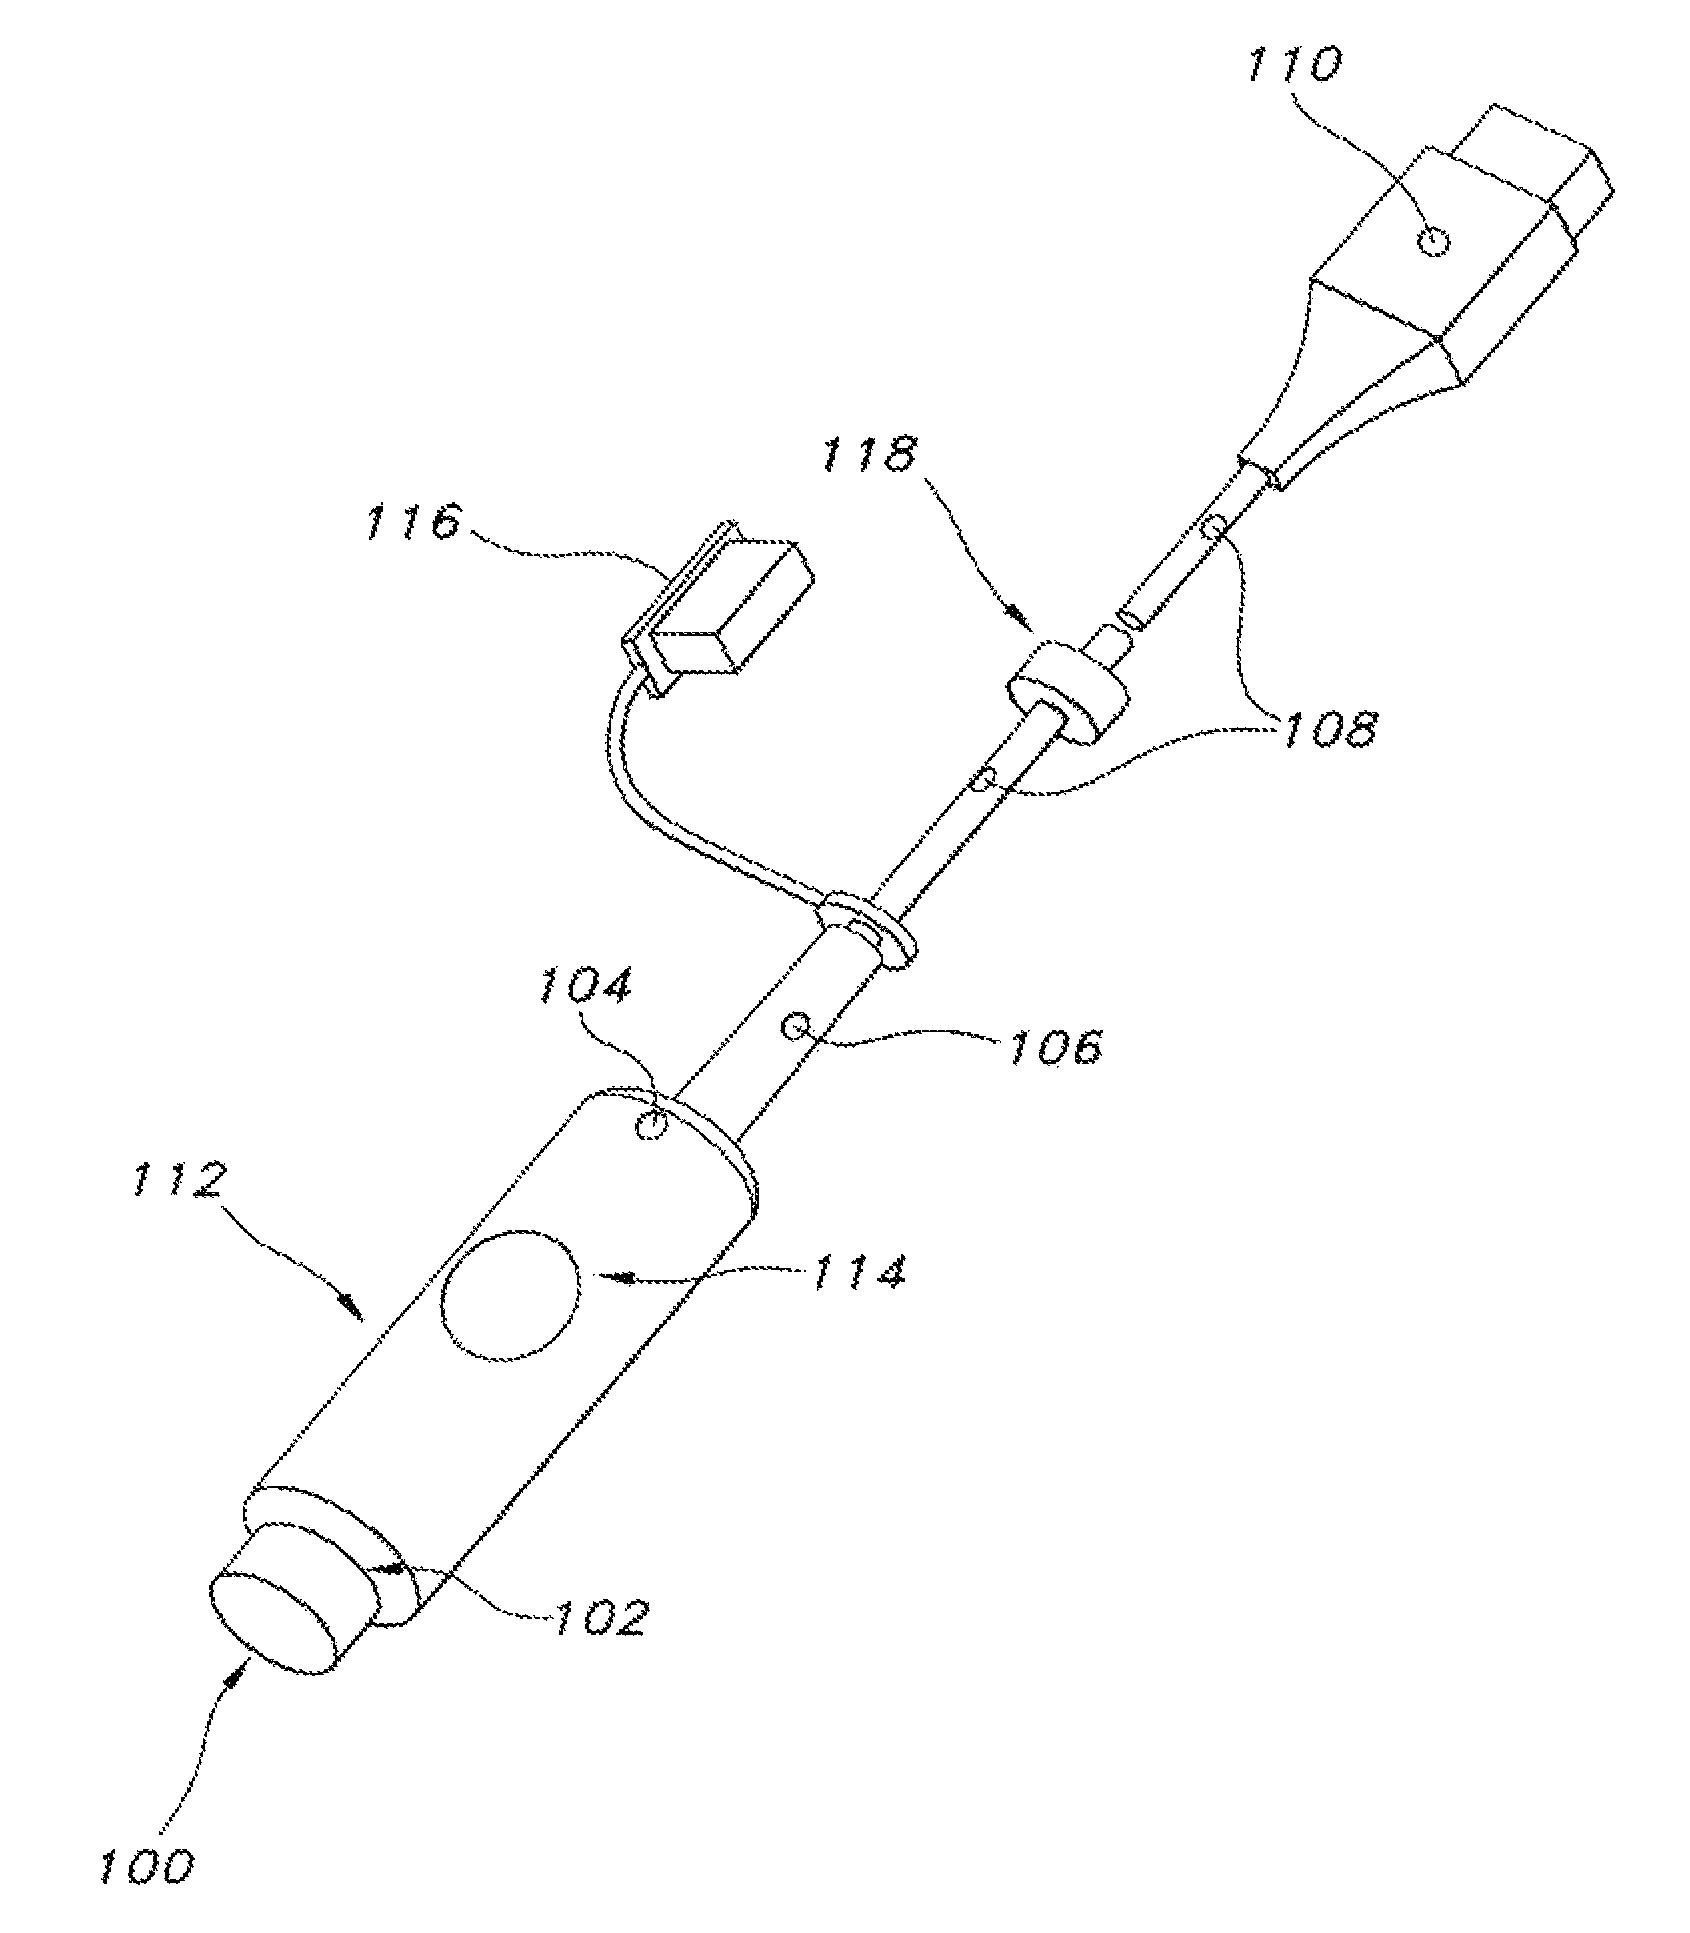 Intrauterine pressure catheter interface cable system